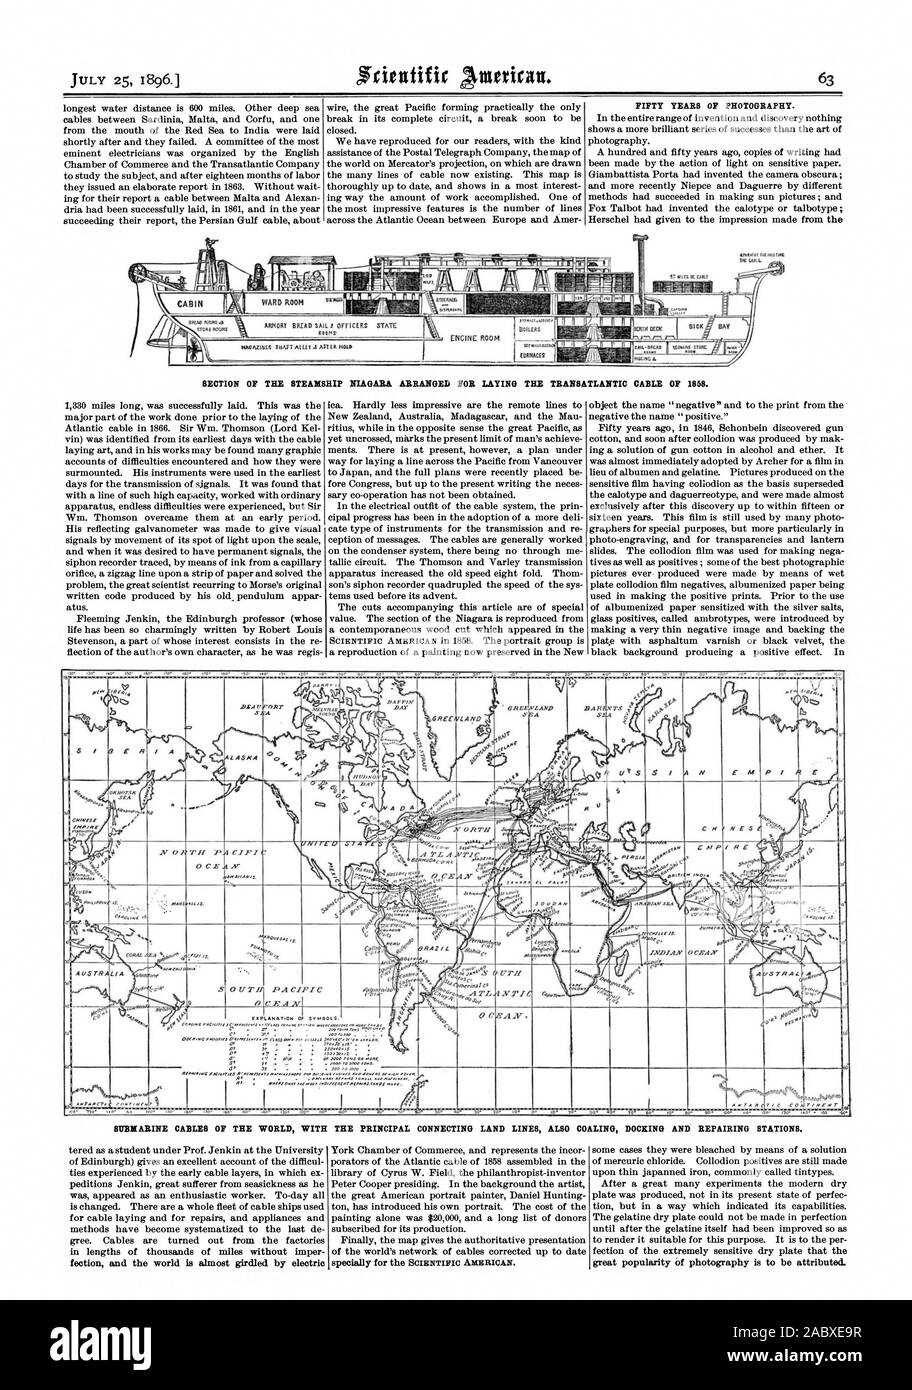 SUBMARINE CABLES OF THE WORLD WITH THE PRINCIPAL CONNECTING LAND LINES ALSO COALING DOCKING AND REPAIRING STATIONS., scientific american, 1896-07-25 Stock Photo